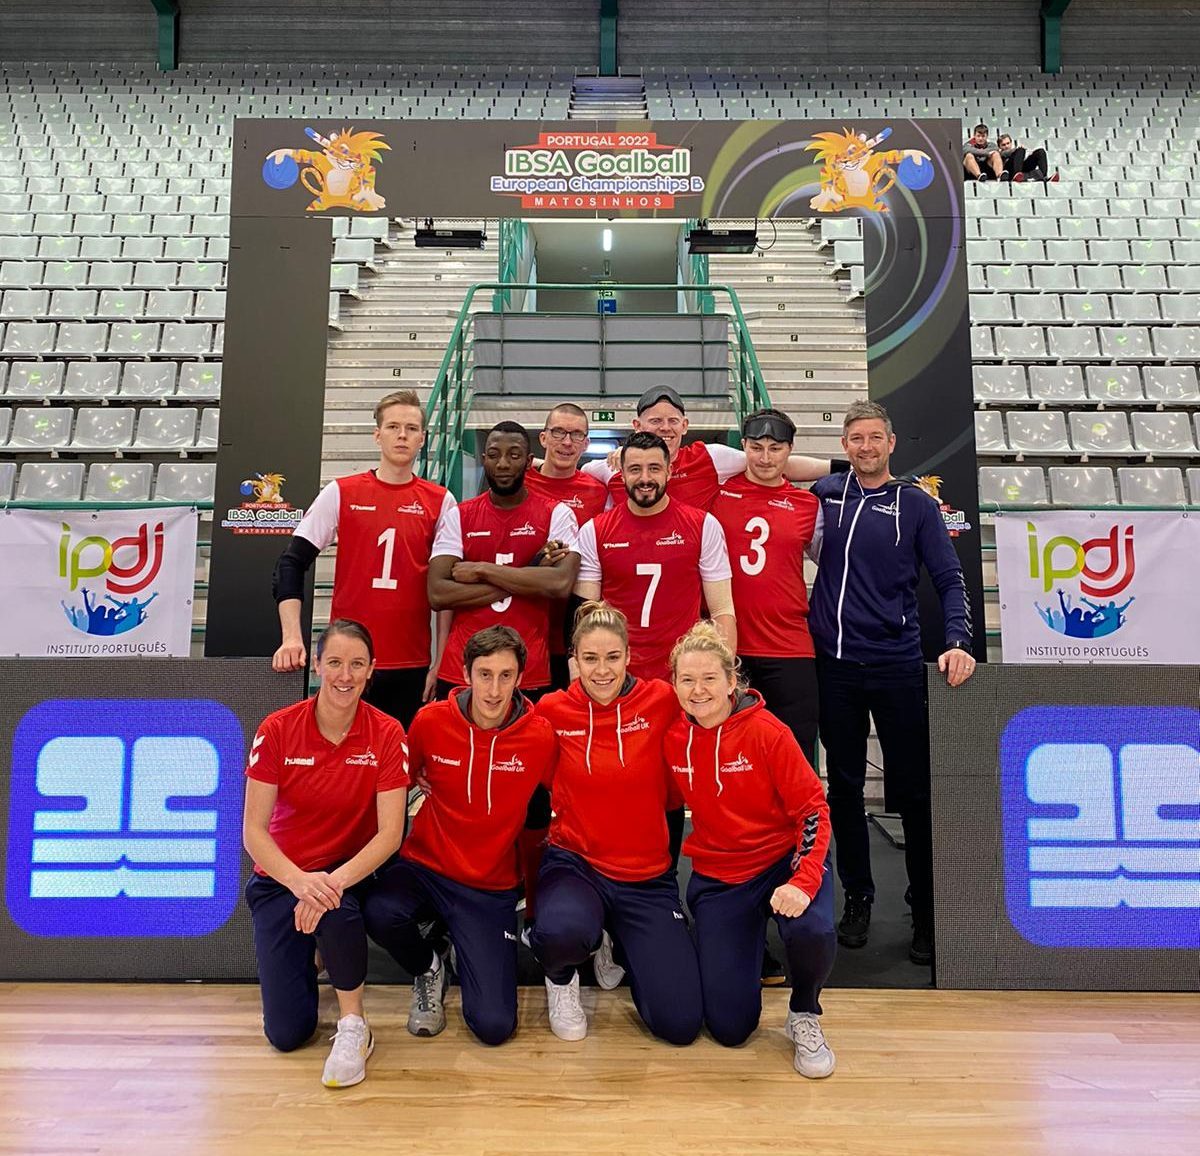 The GB squad including staff posting for a group photo under a branded banner at the Euros.